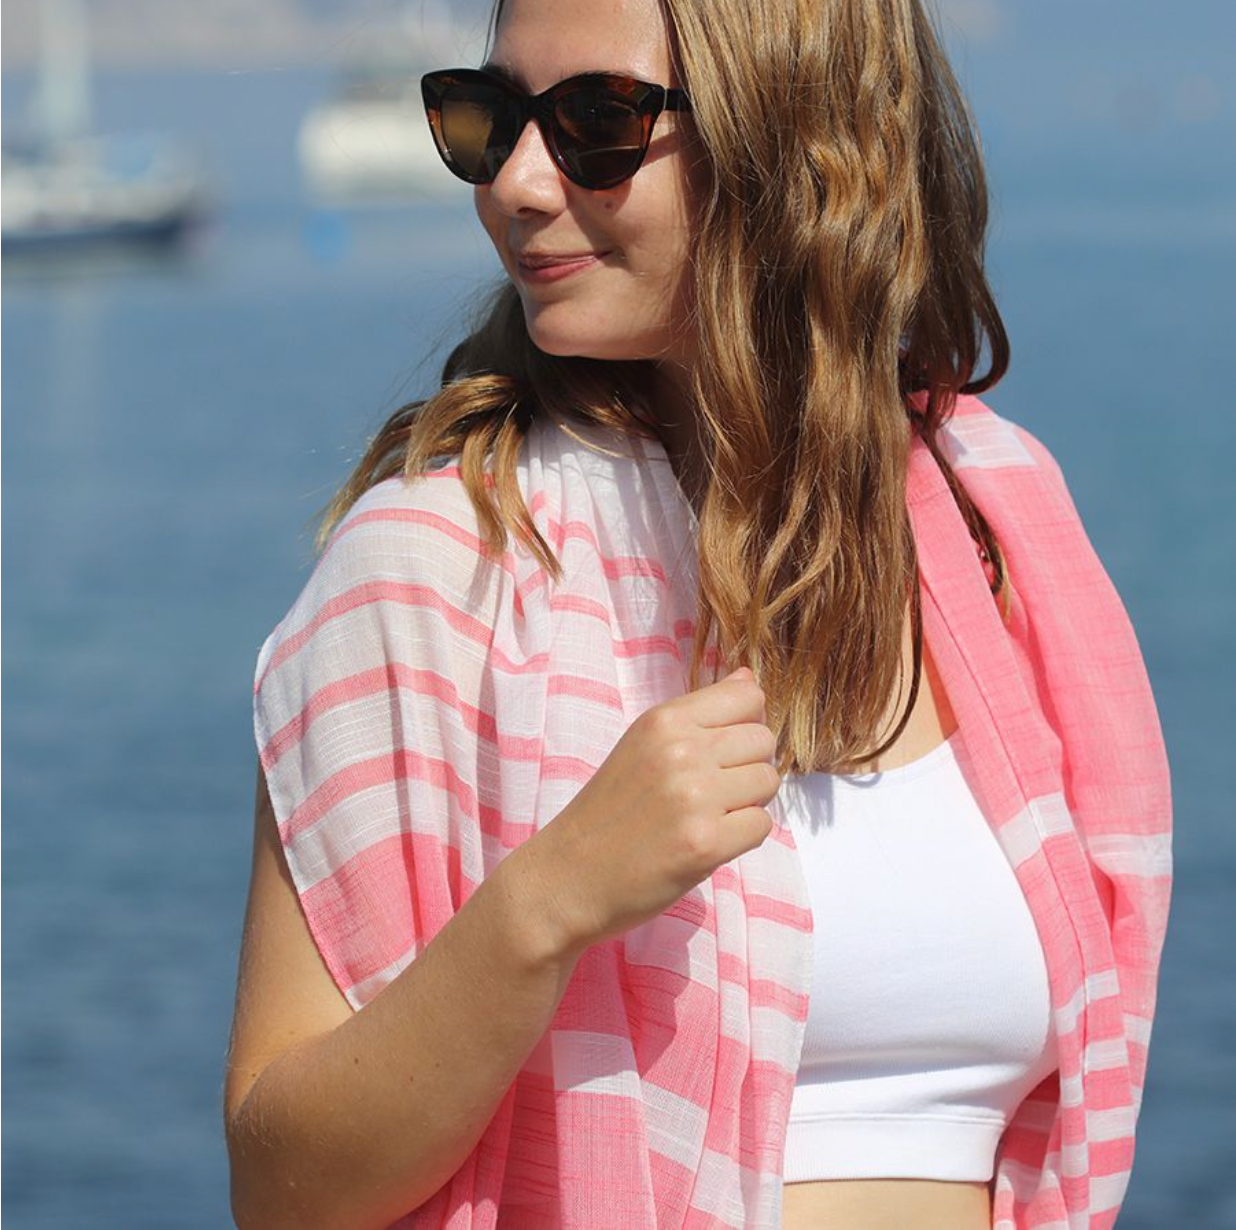 Coral & White Summer Scarf Worn by Model